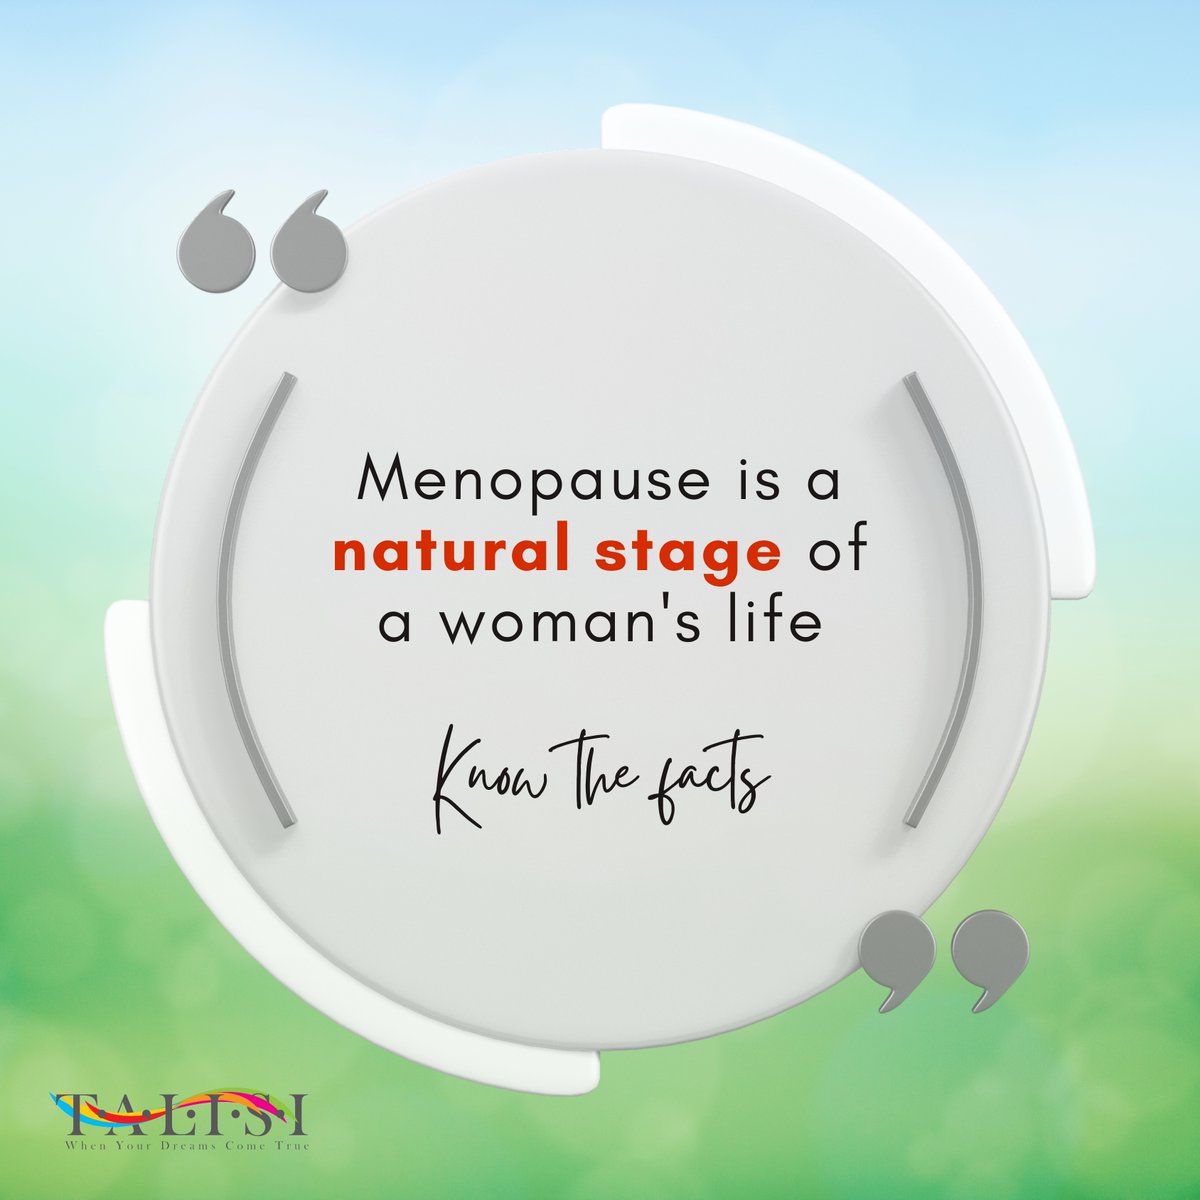 Menopause is a natural biological process. Most women experience menopause between the ages of 45 and 55 years as a natural part of biological aging. 
.
#talisi #menstrualcups #menstrualcycle #feminine #hygiene #periodcup #periods #menstruation #womenshealth #periodproblem